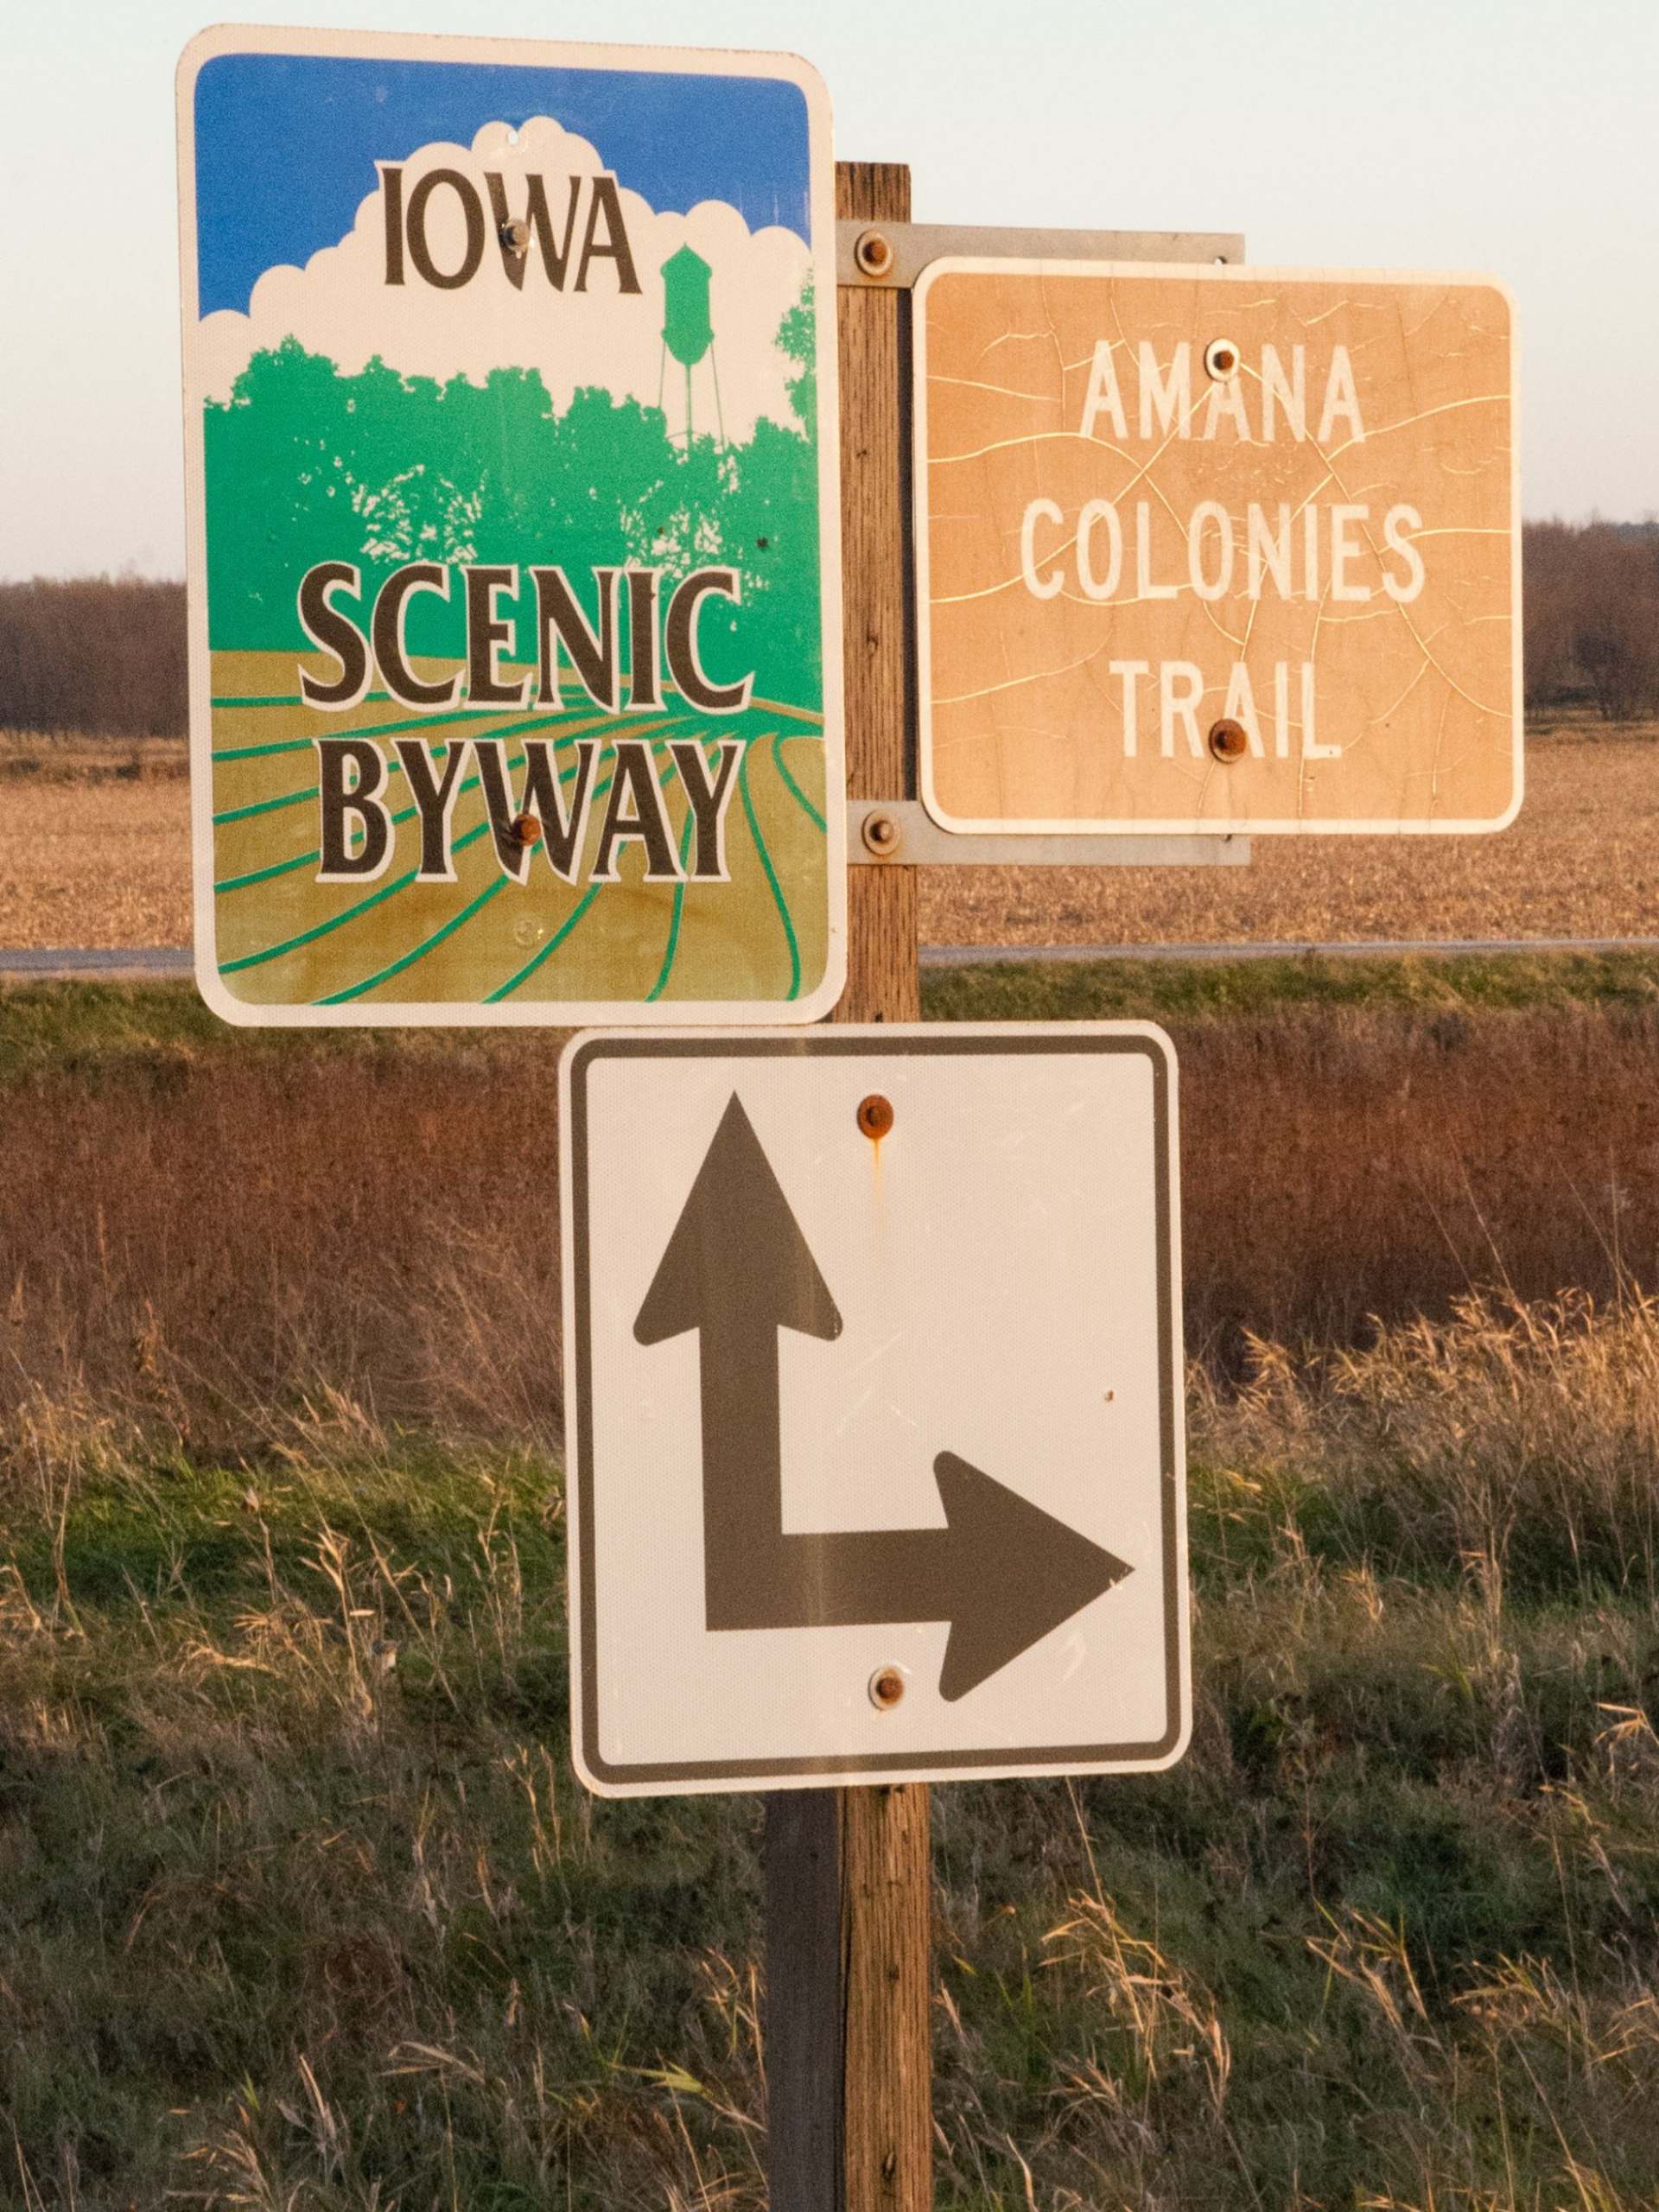 Amana-Colonies-Trail-sign